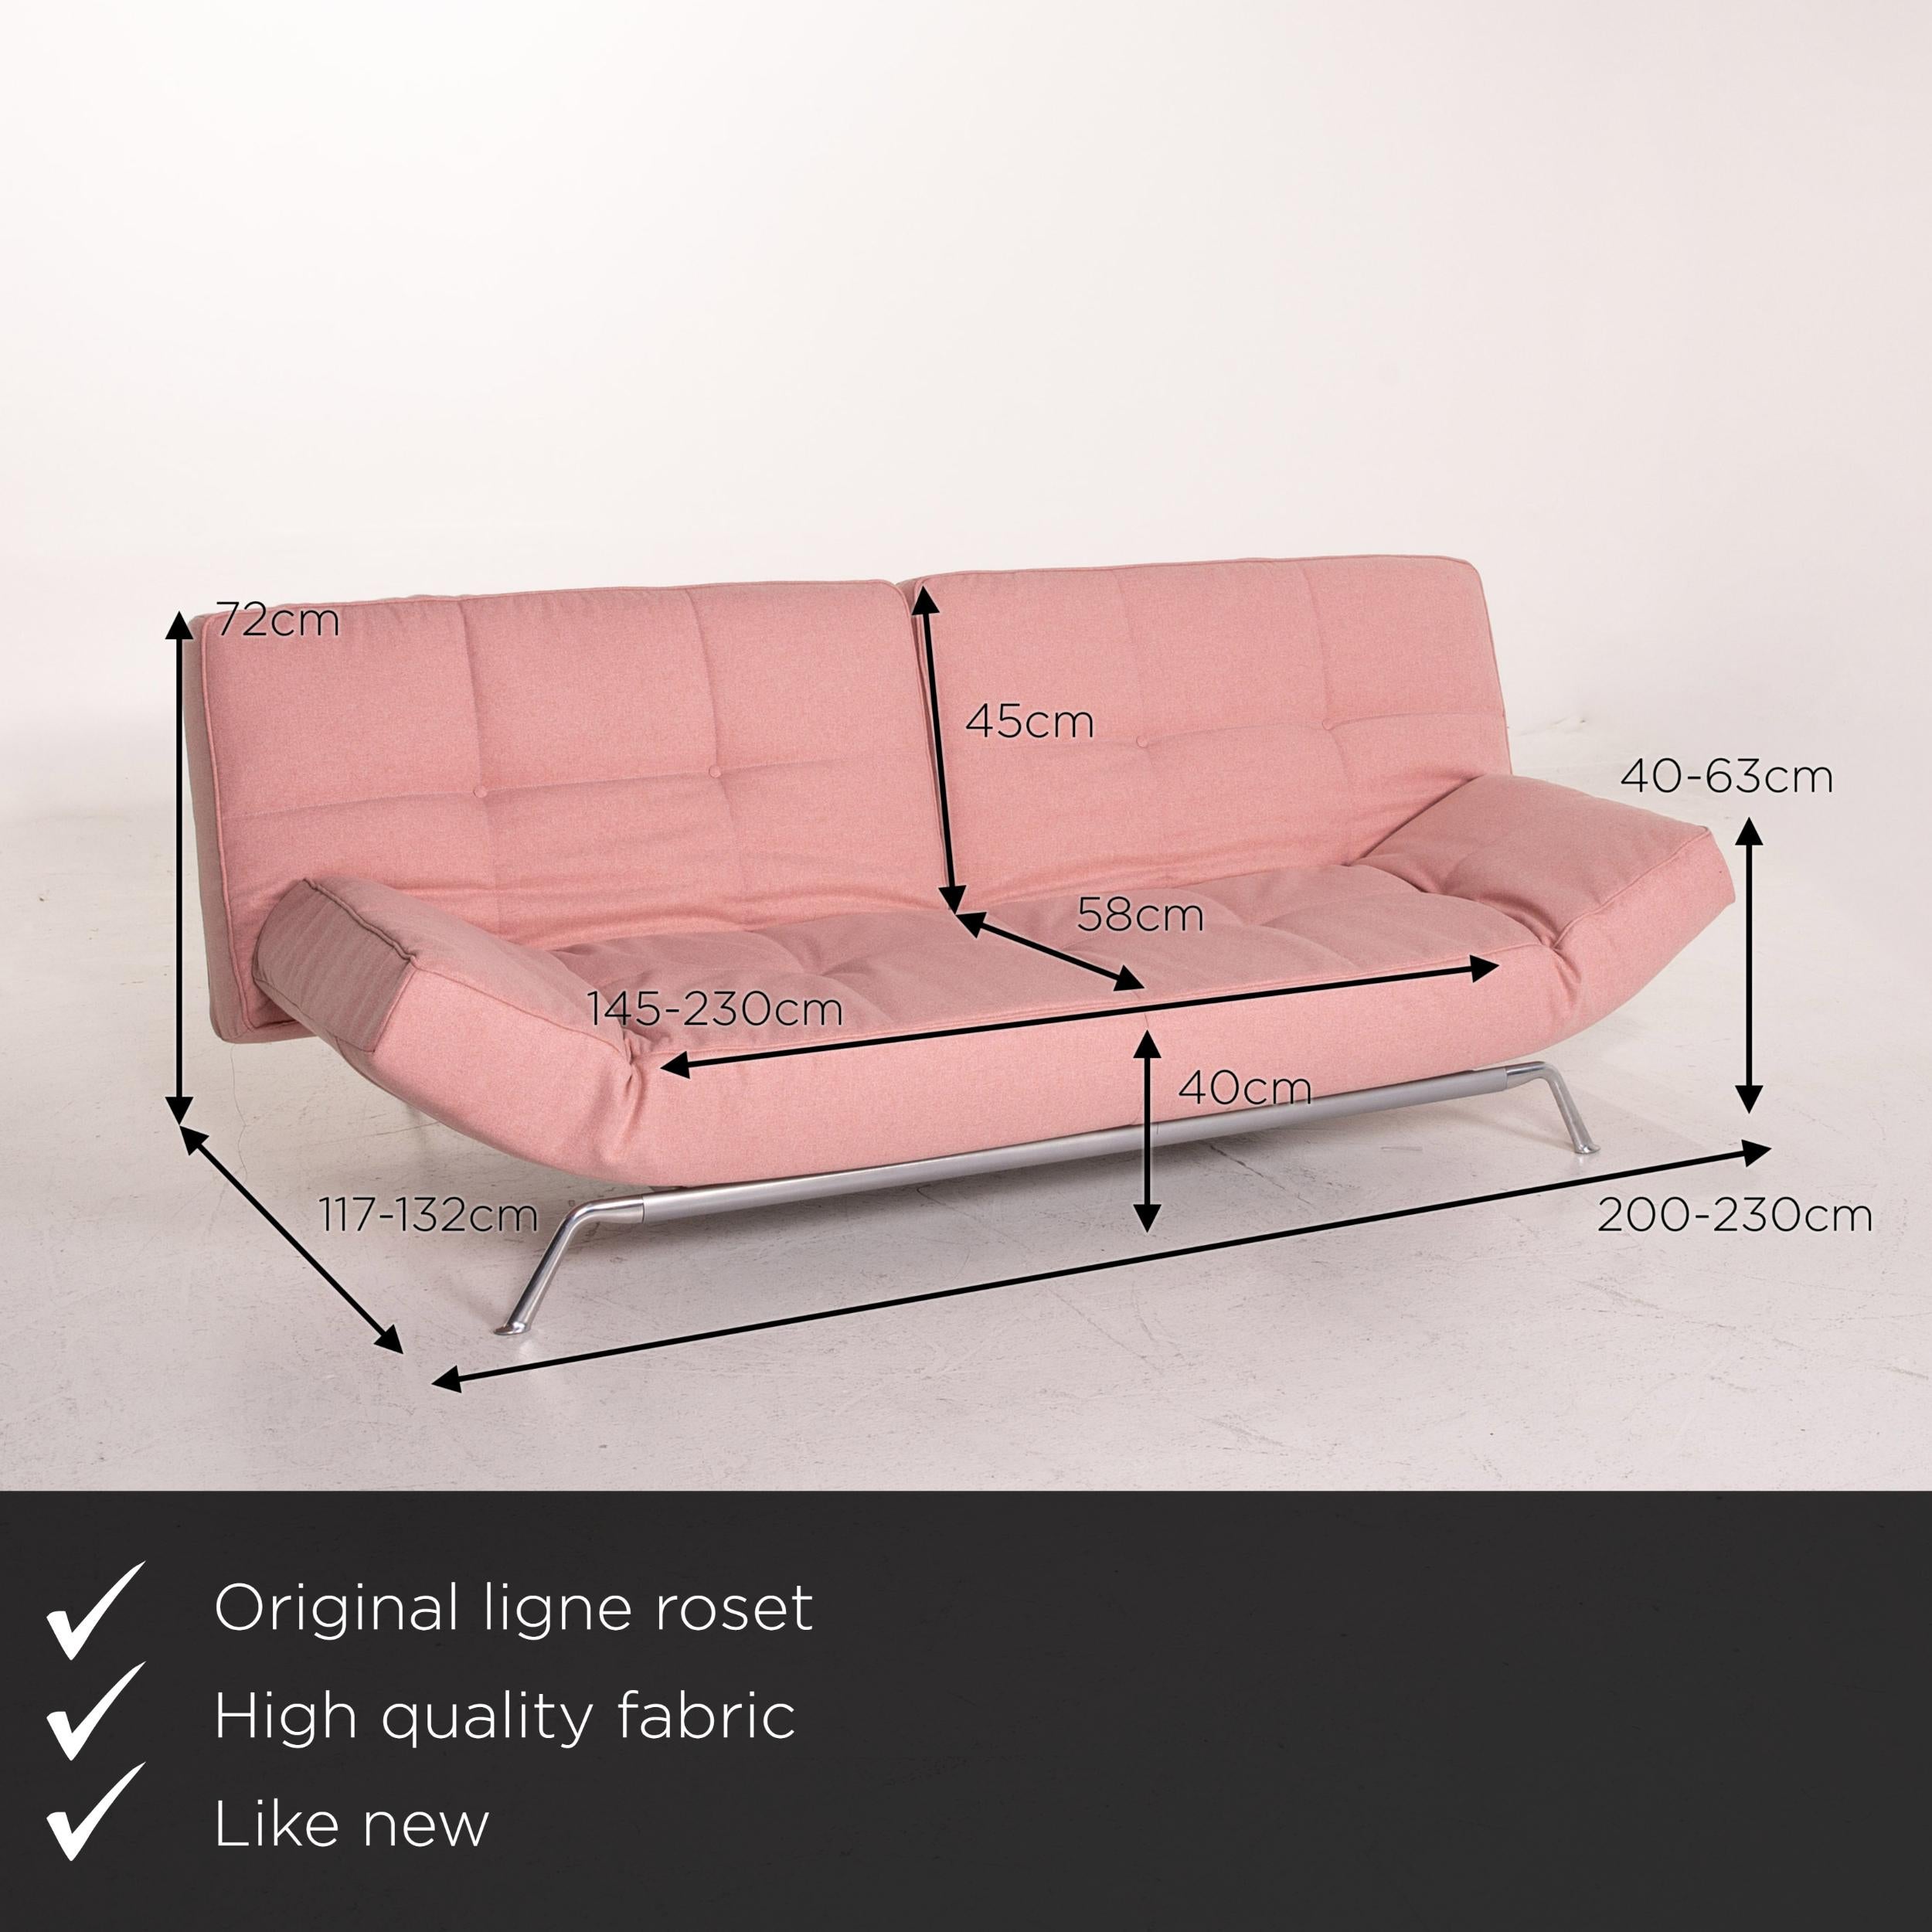 We present to you a ligne roset Smala fabric sofa rosé pink three-seat function sleeping function.
 

 Product measurements in centimeters:
 

Depth 117
Width 200
Height 72
Seat height 40
Rest height 63
Seat depth 58
Seat width 145
Back